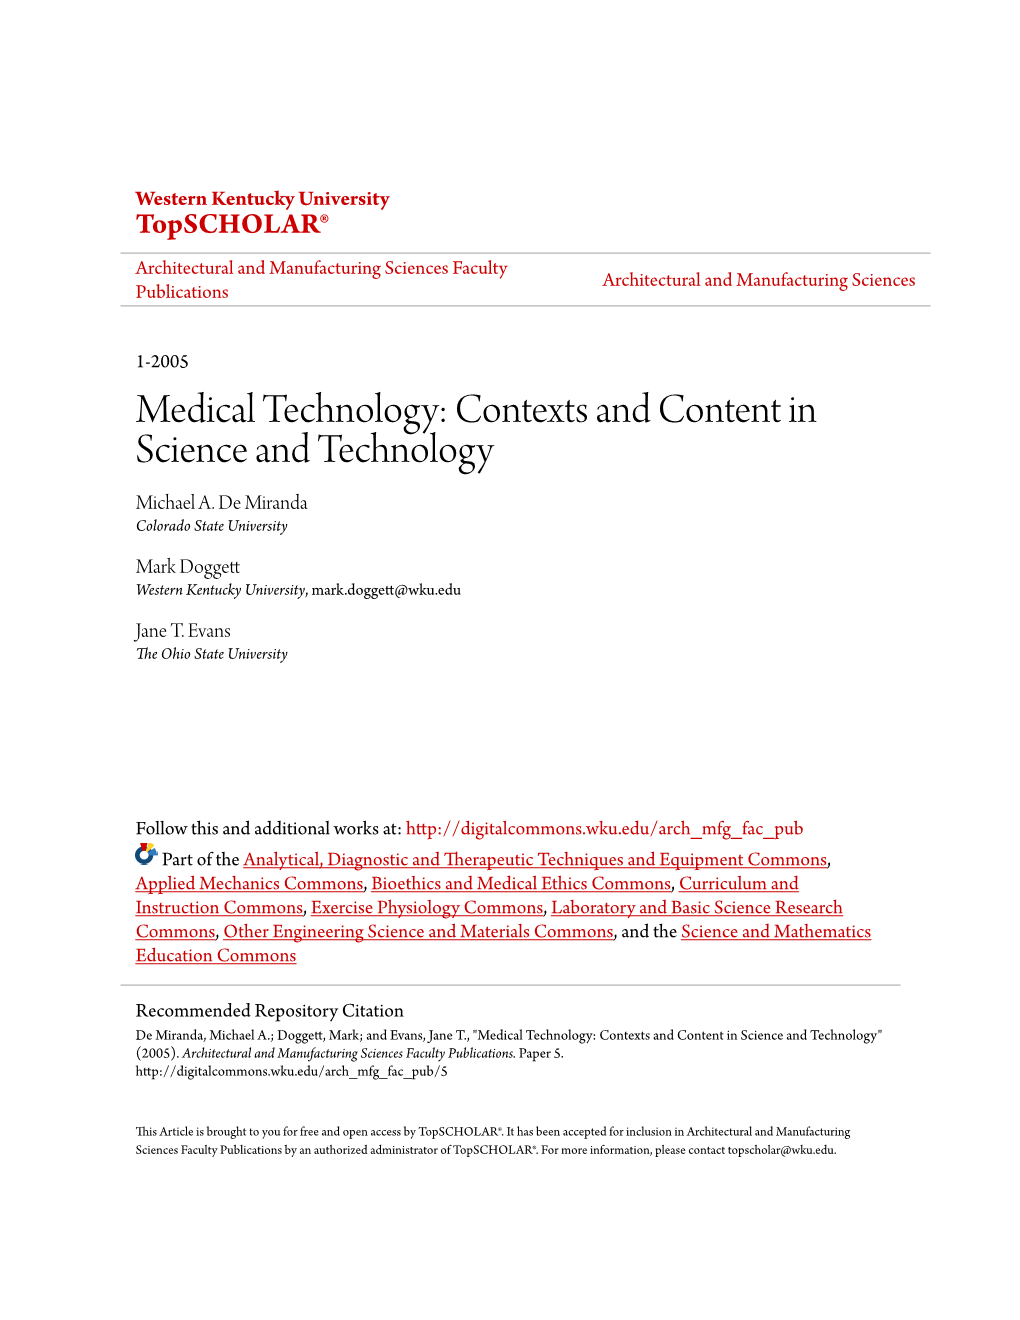 Medical Technology: Contexts and Content in Science and Technology Michael A